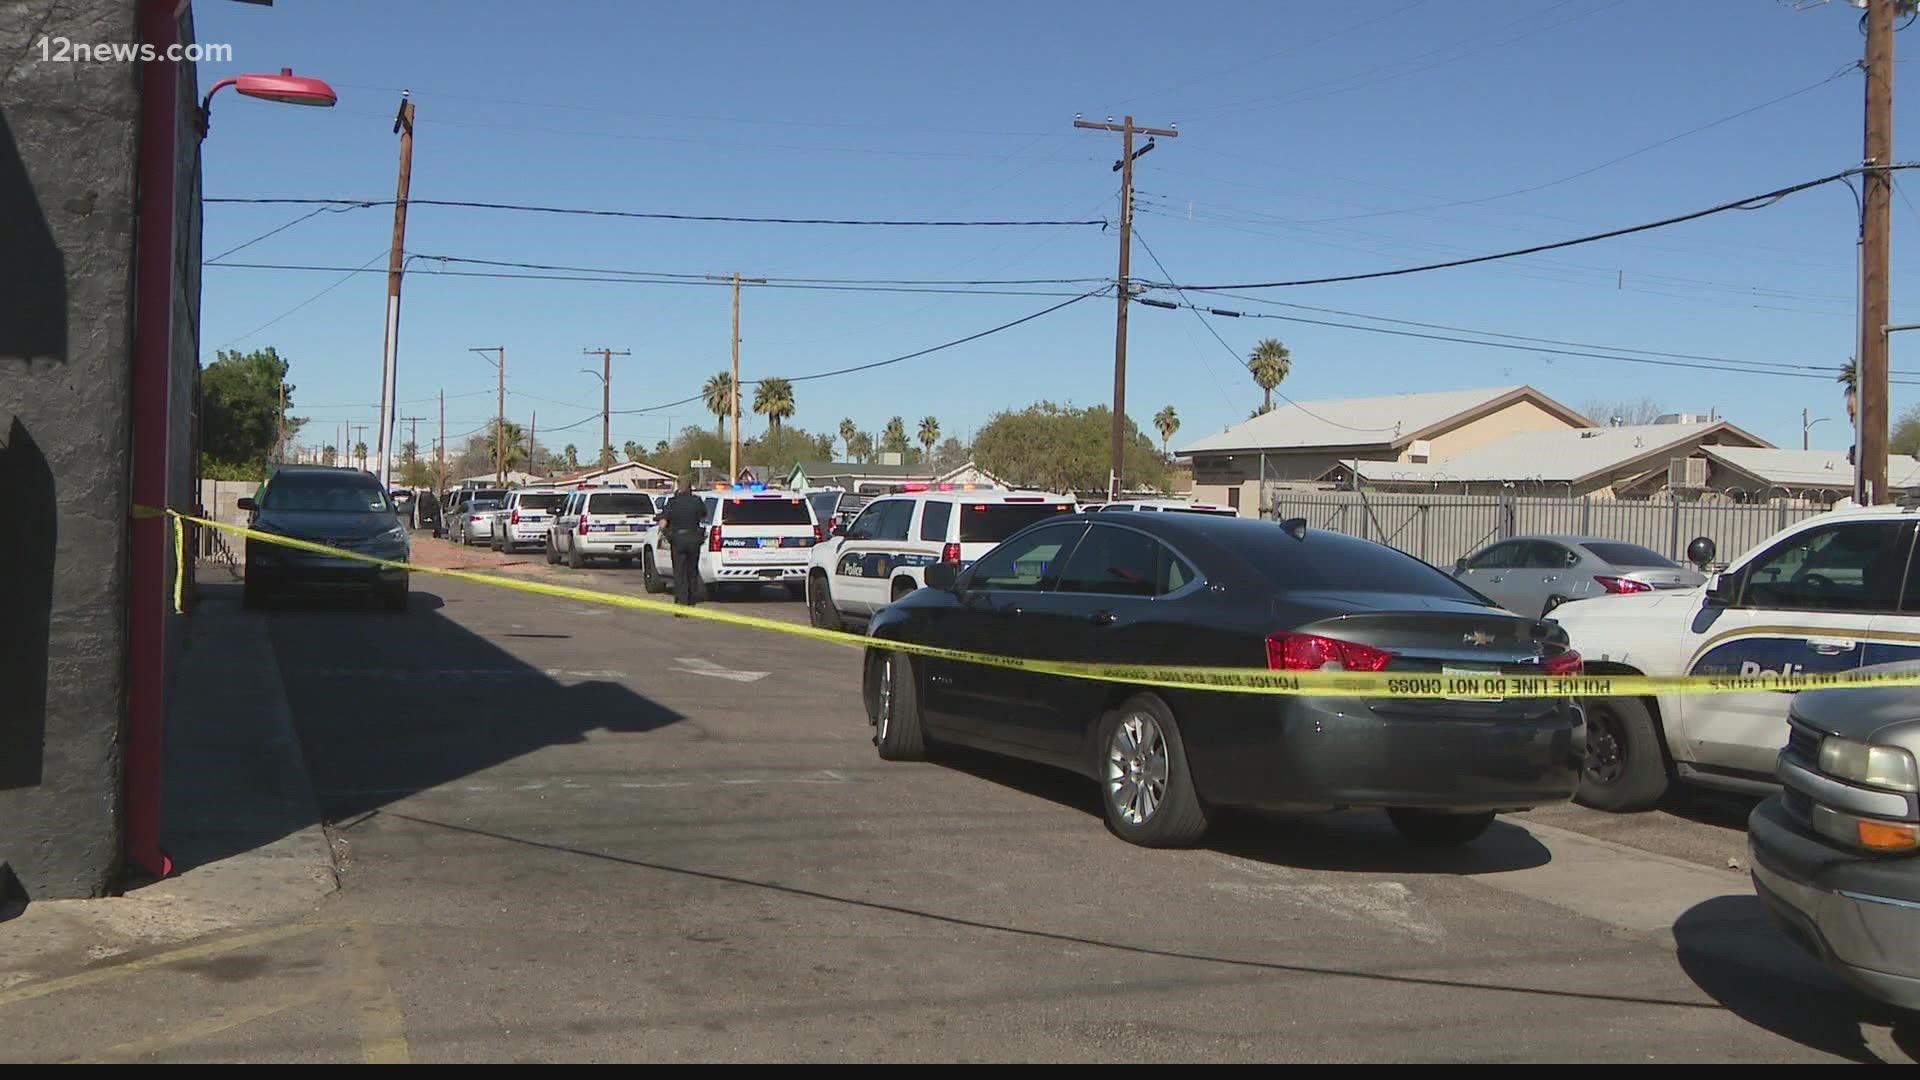 A shooting involving Phoenix police officers has left one man dead. The shooting occurred at 30th Ave. and McDowell. Police say the man was holding a sharp object.